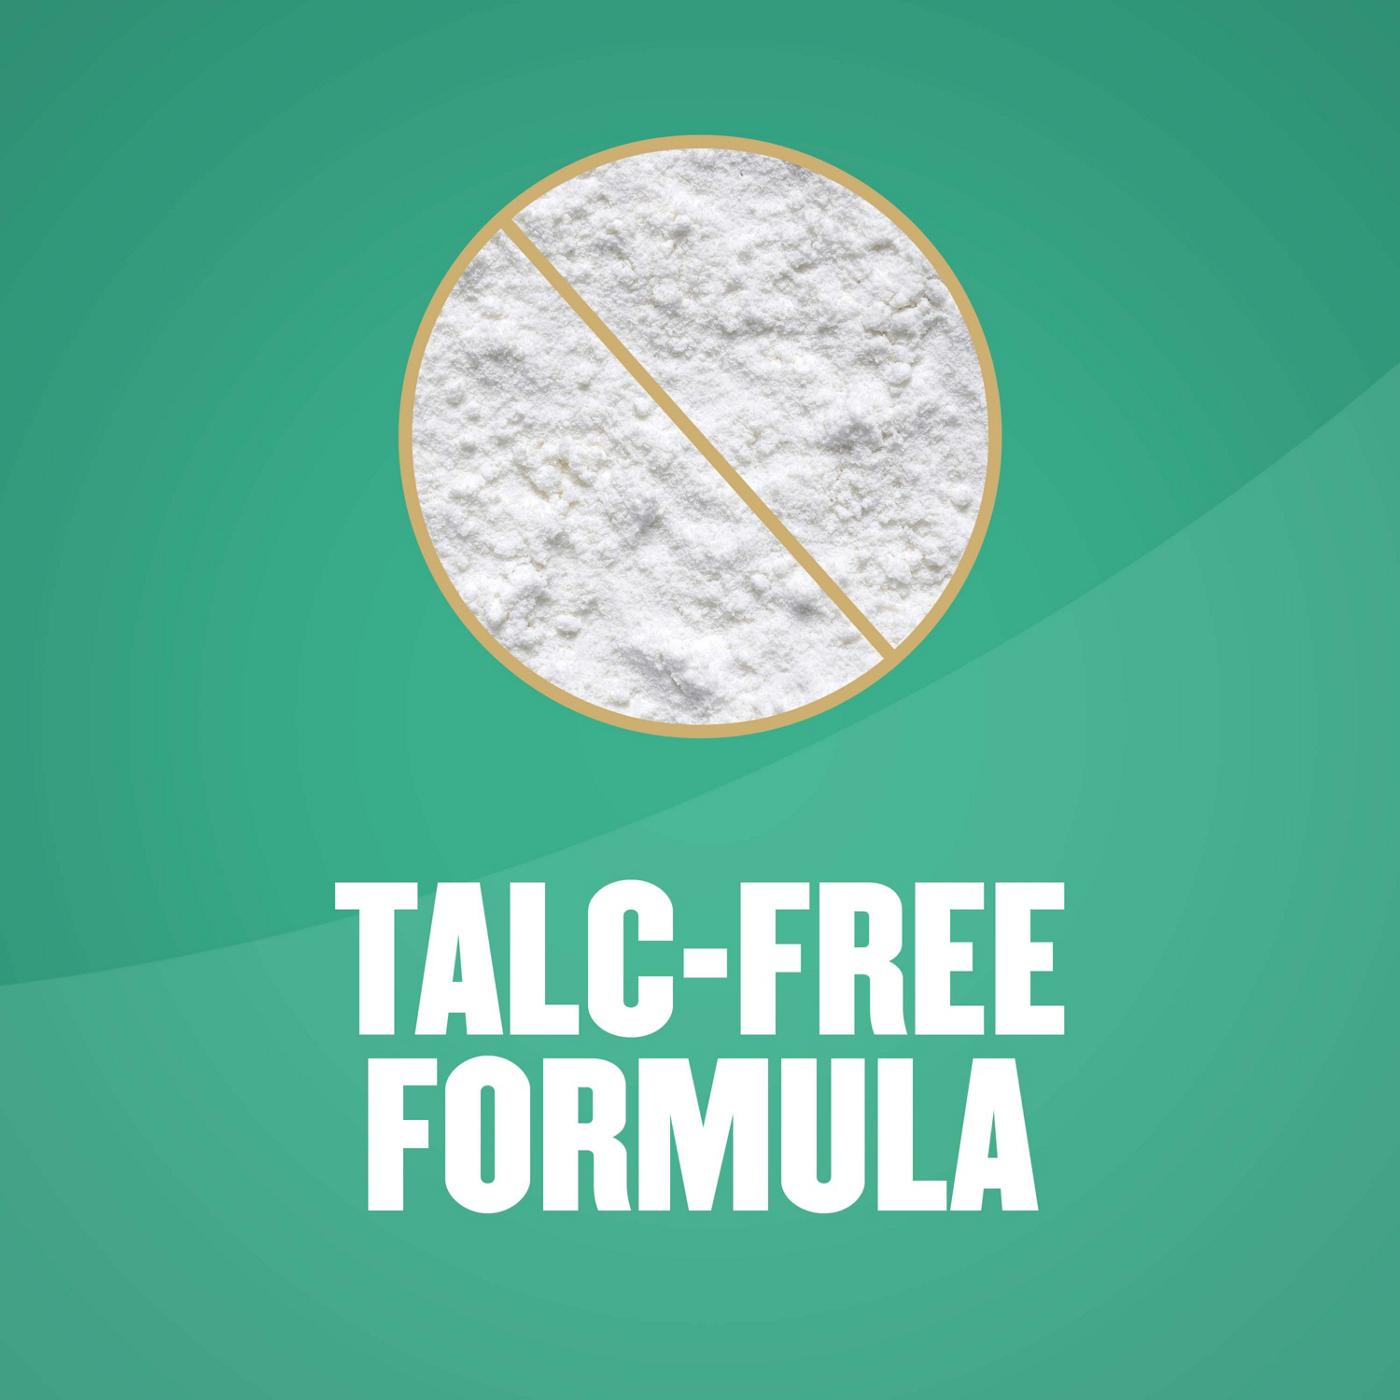 Gold Bond Medicated Talc-Free Extra Strength Body Powderfor Cooling, Absorbing Itch Relief; image 6 of 7